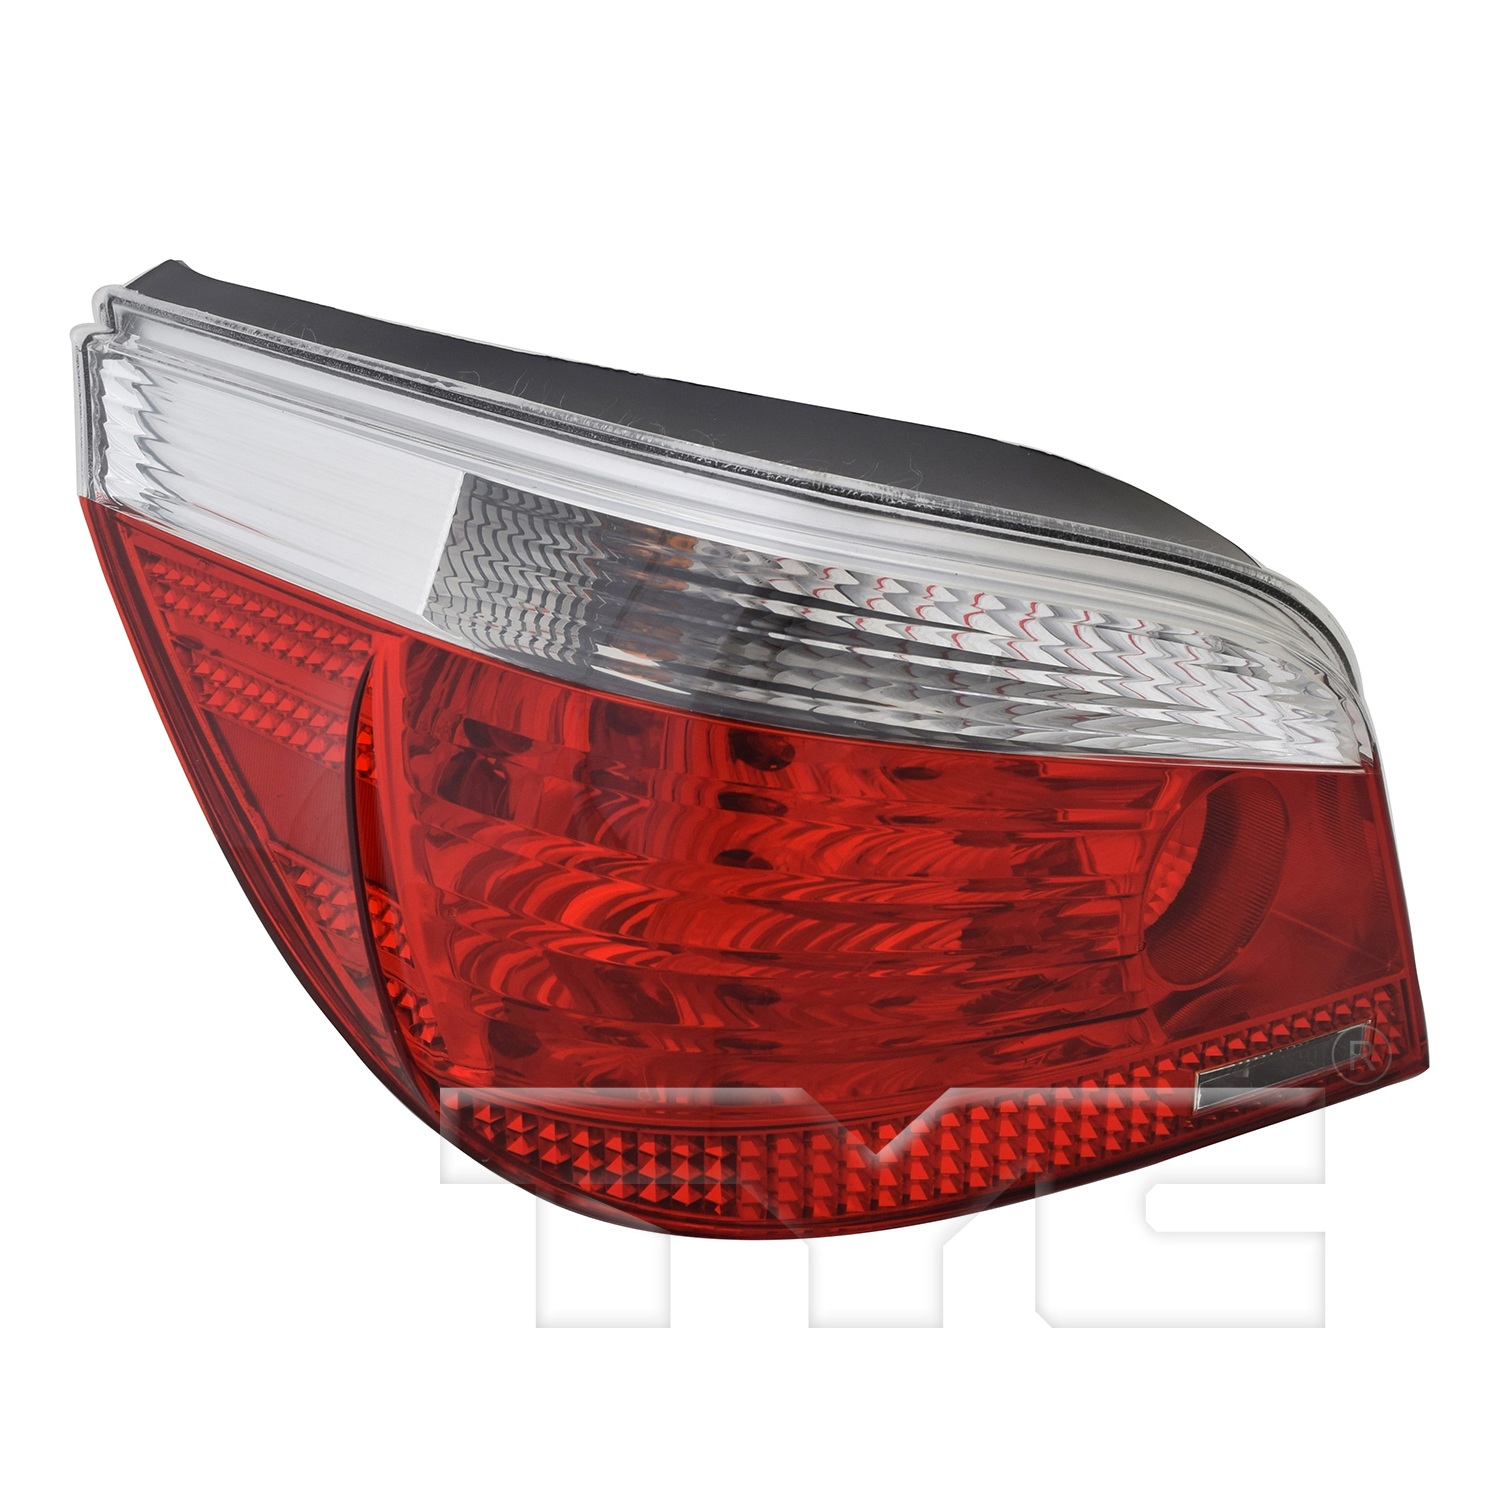 Aftermarket TAILLIGHTS for BMW - 530I, 530i,04-08,LT Taillamp assy